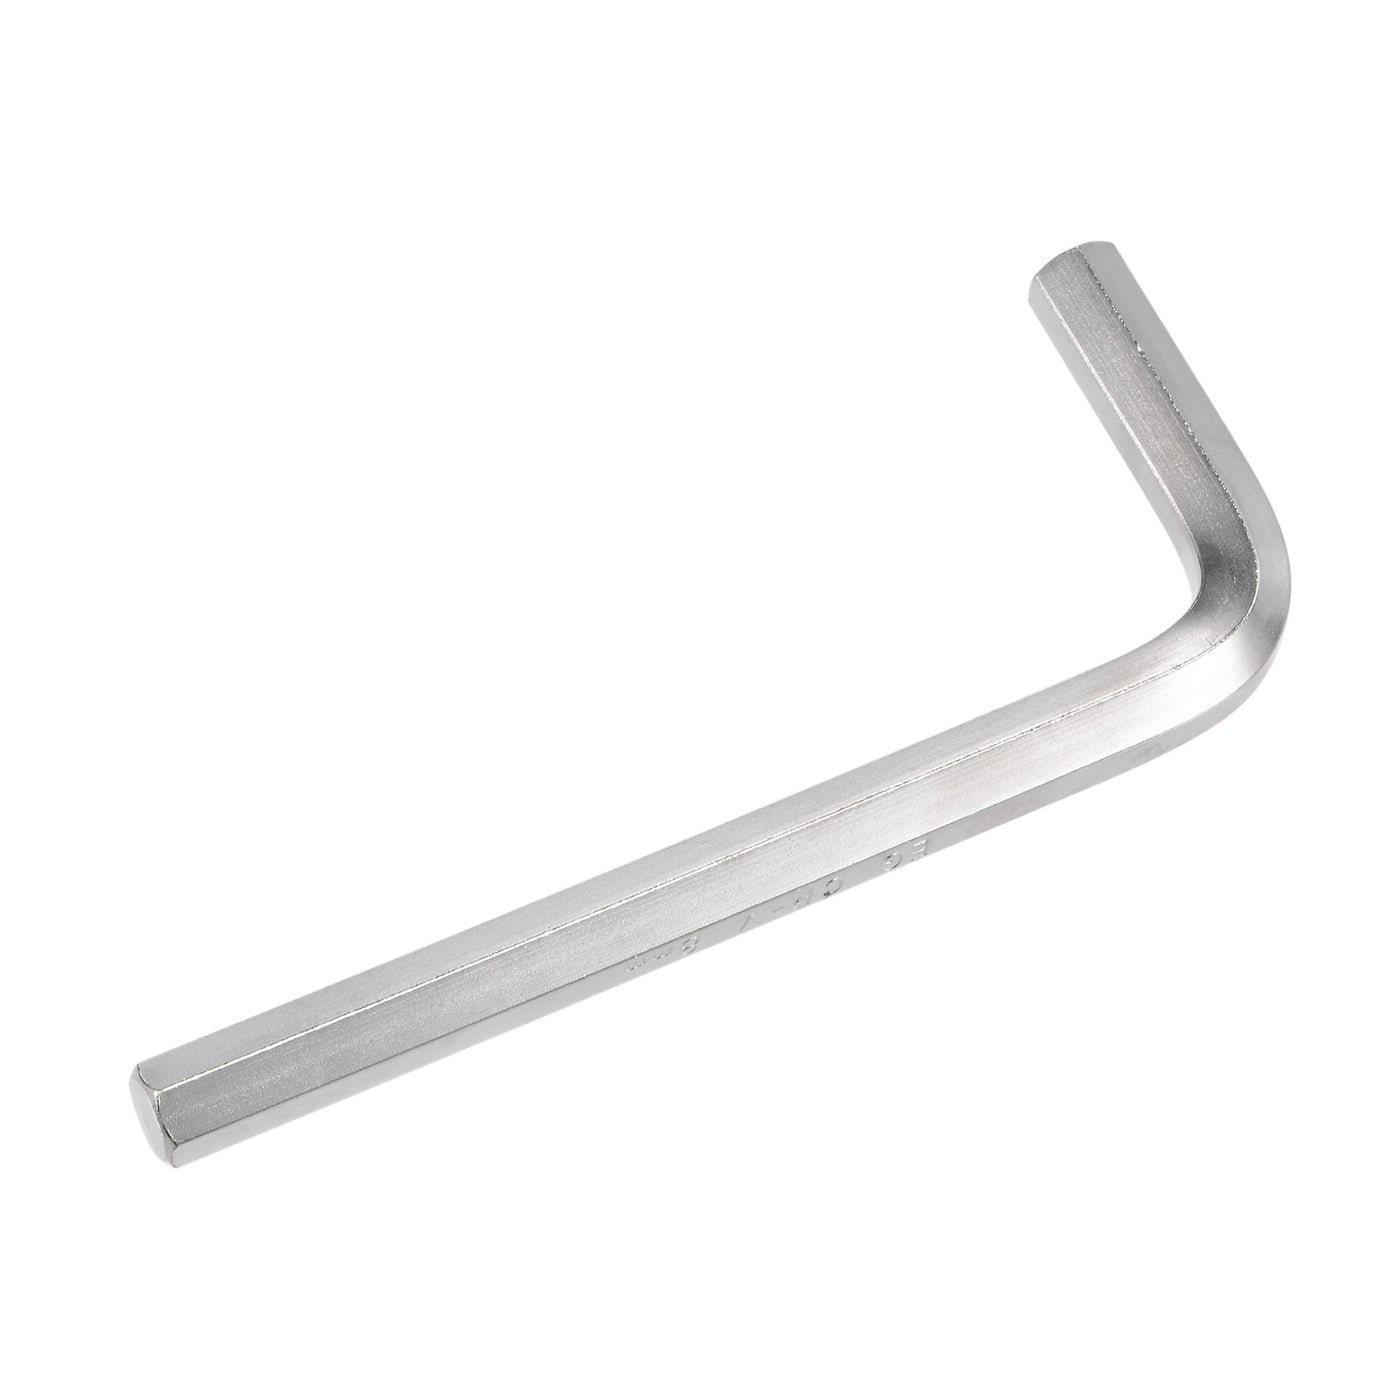 uxcell Uxcell Hex Key Wrench, L Shaped Long Arm CR-V Repair Tool